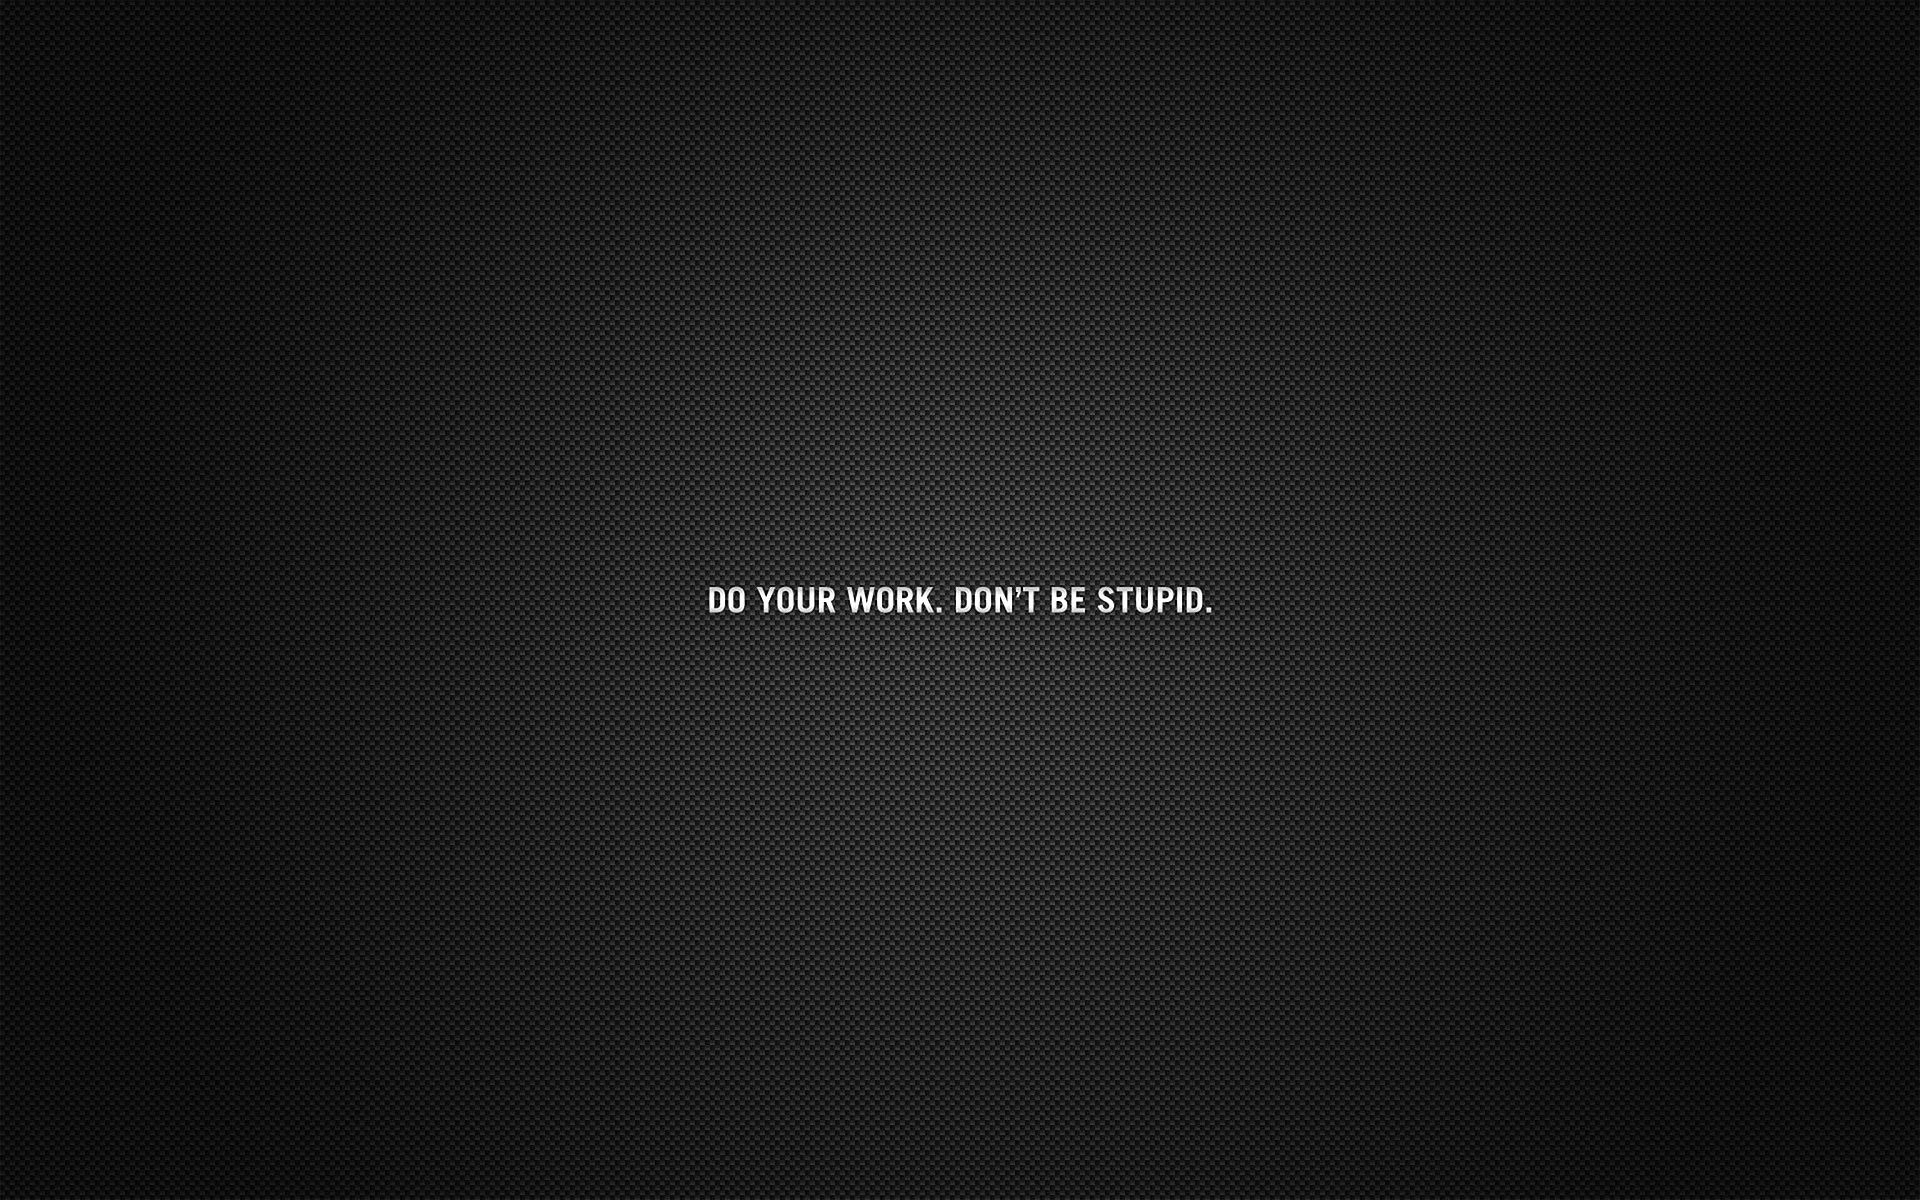 Do Your Work Wallpaper